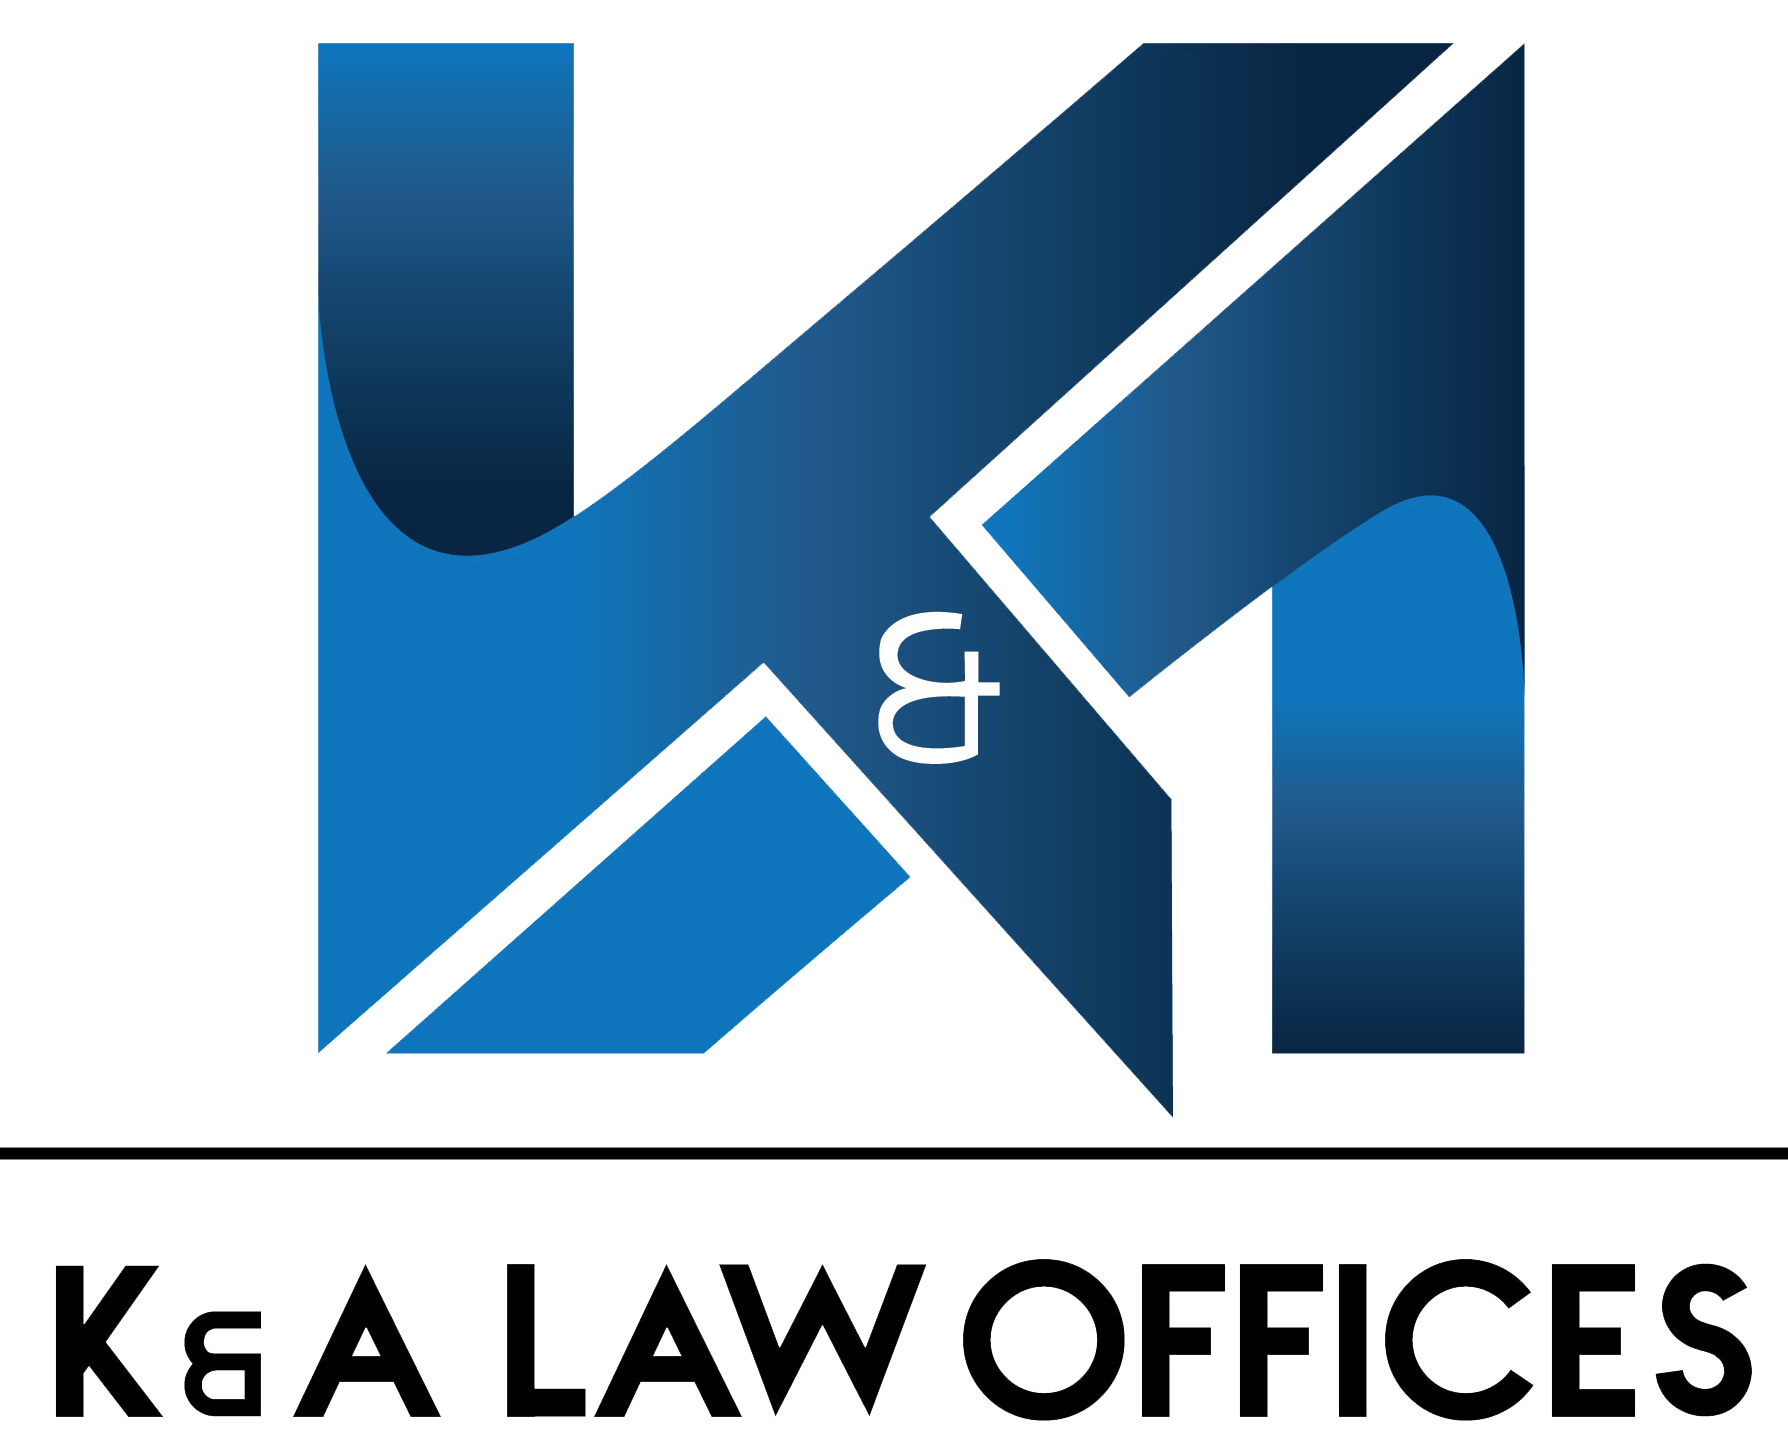 K&A LAW OFFICES